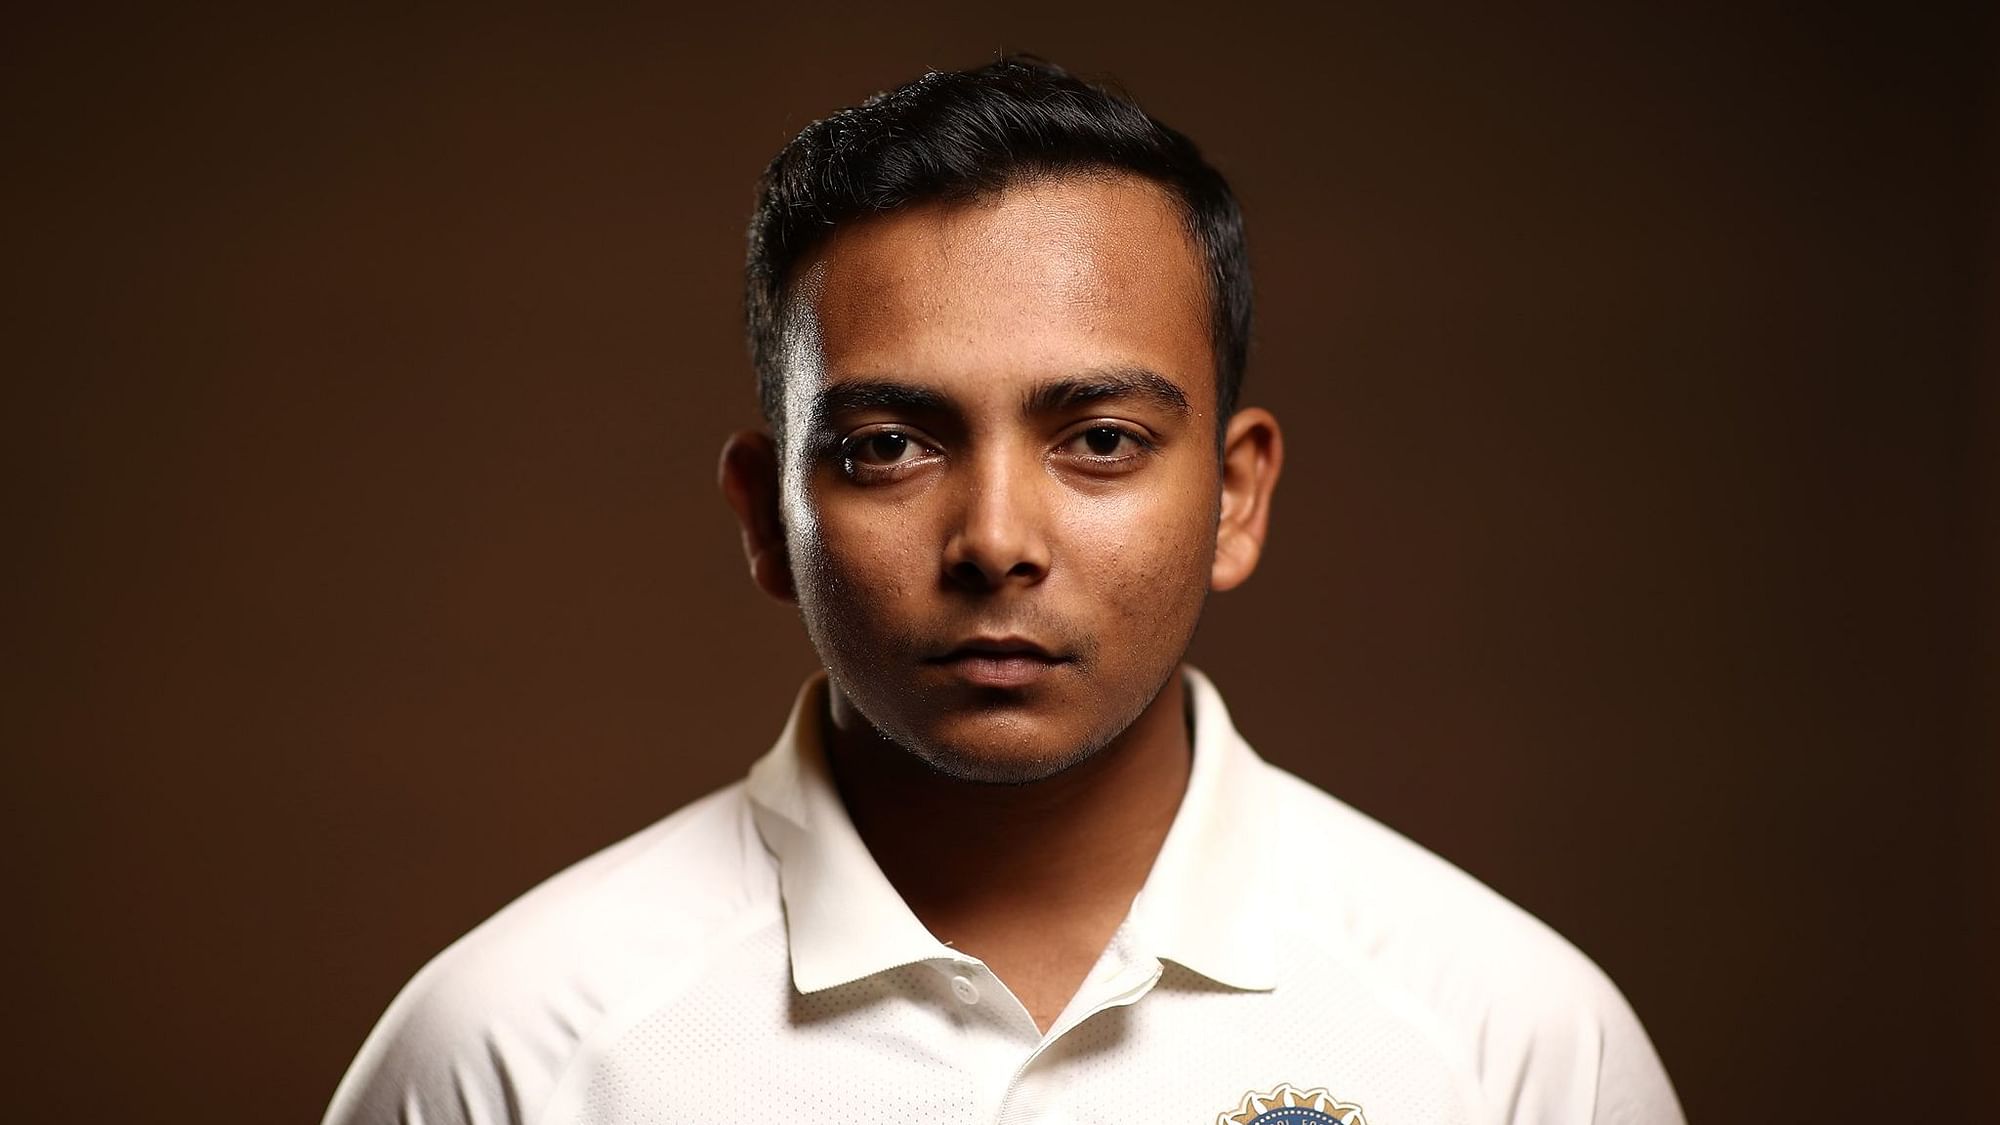 A beleaguered Prithvi Shaw admitted the eight-month doping ban has “shaken him”